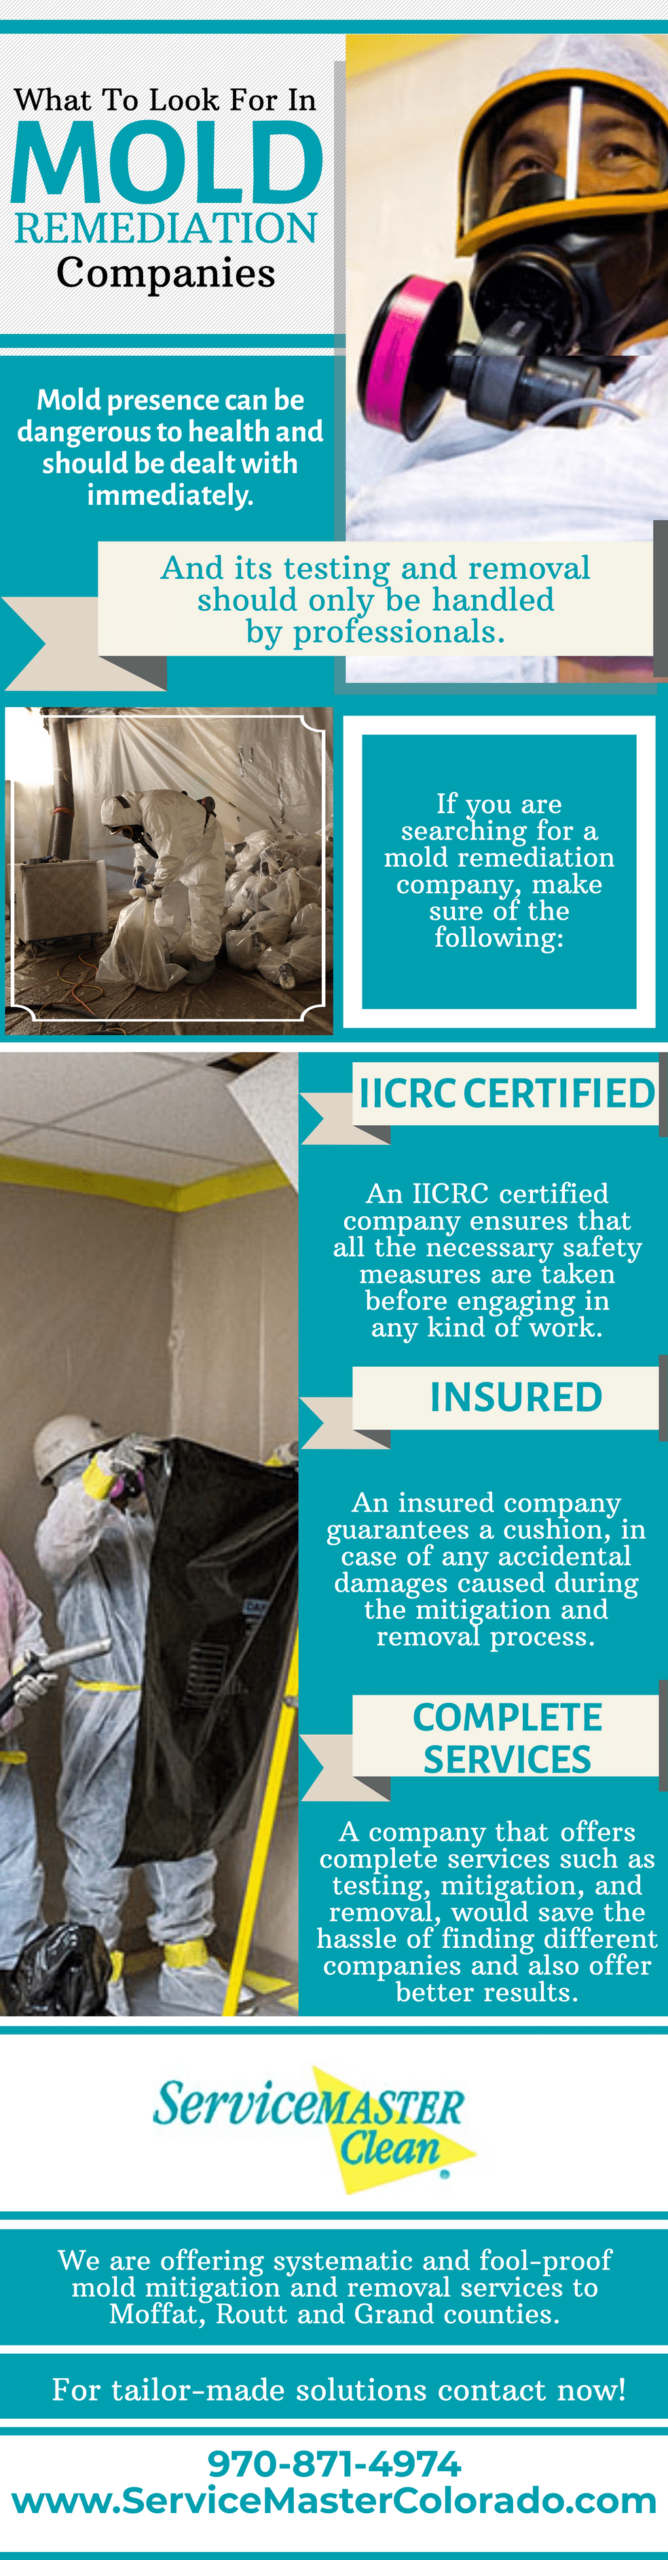  What To Look For In Mold Remediation Companies